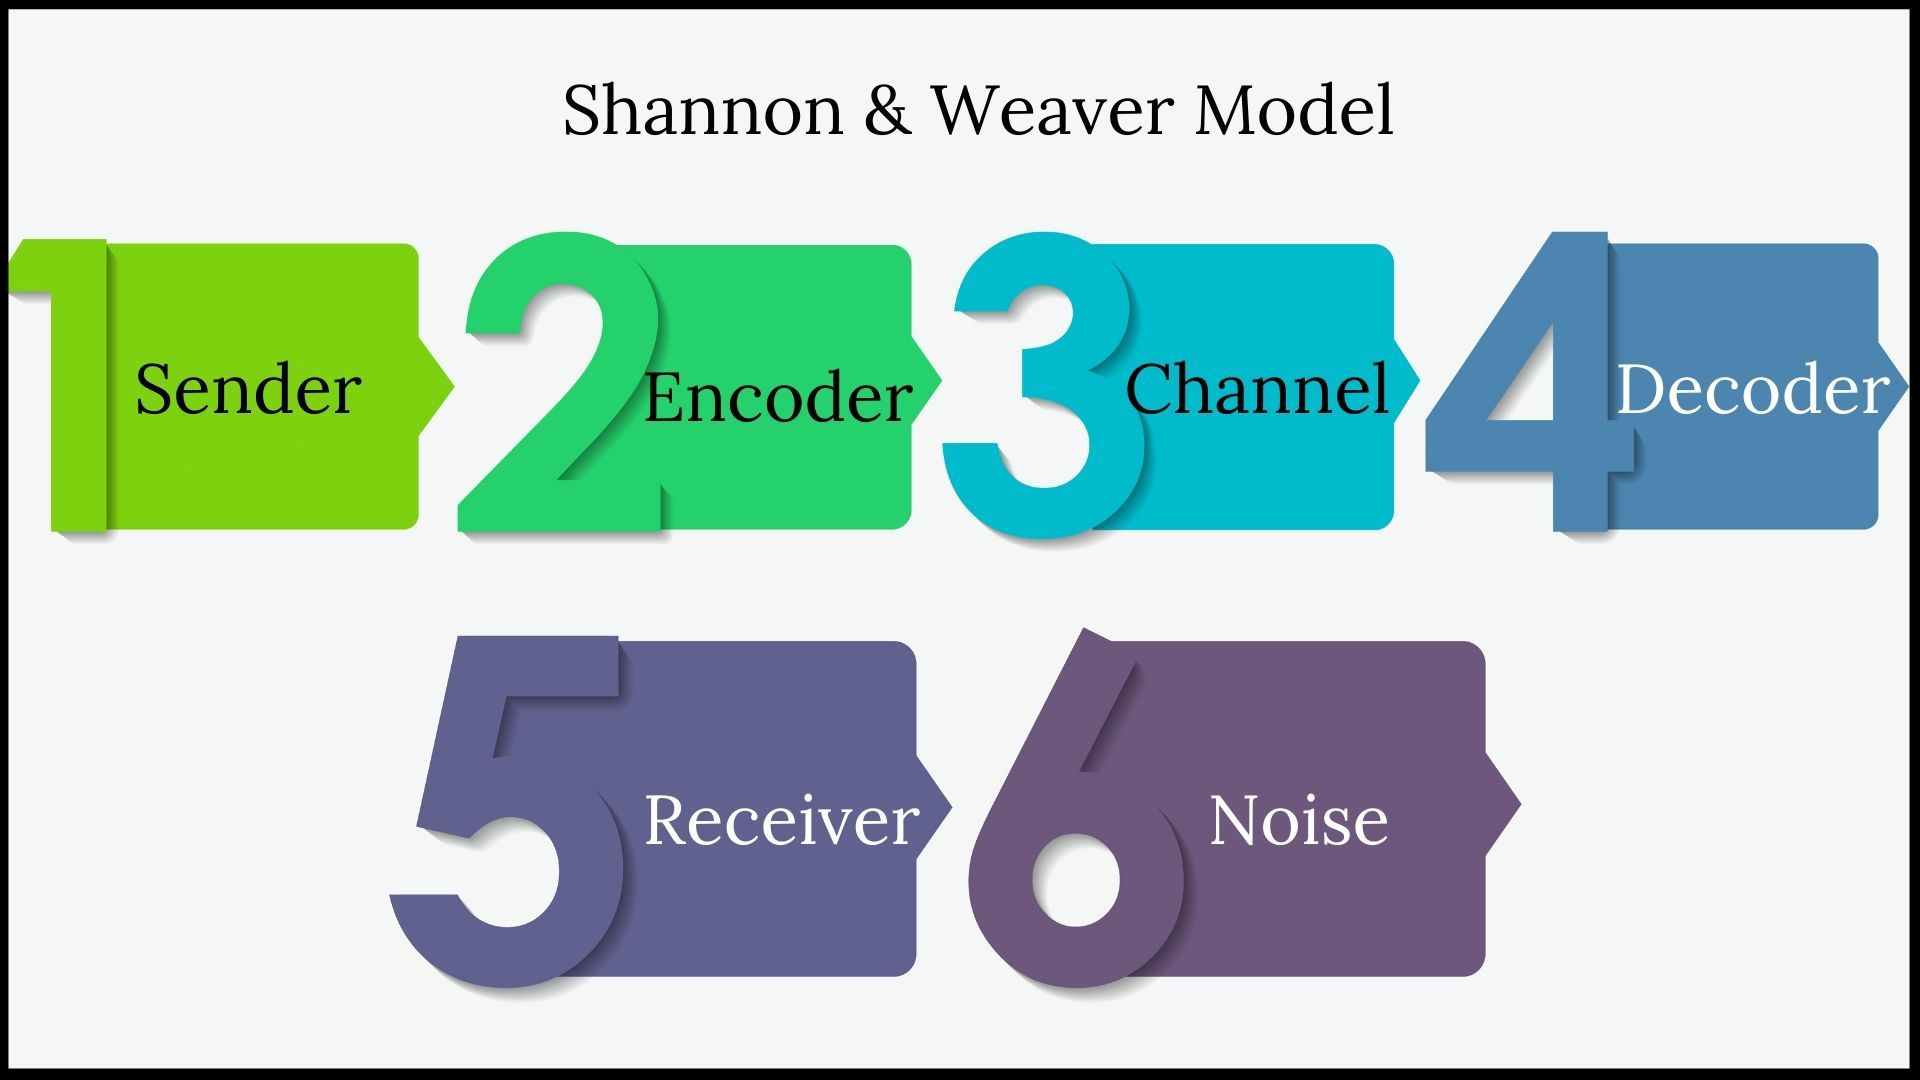 Components of Shannon and weaver model